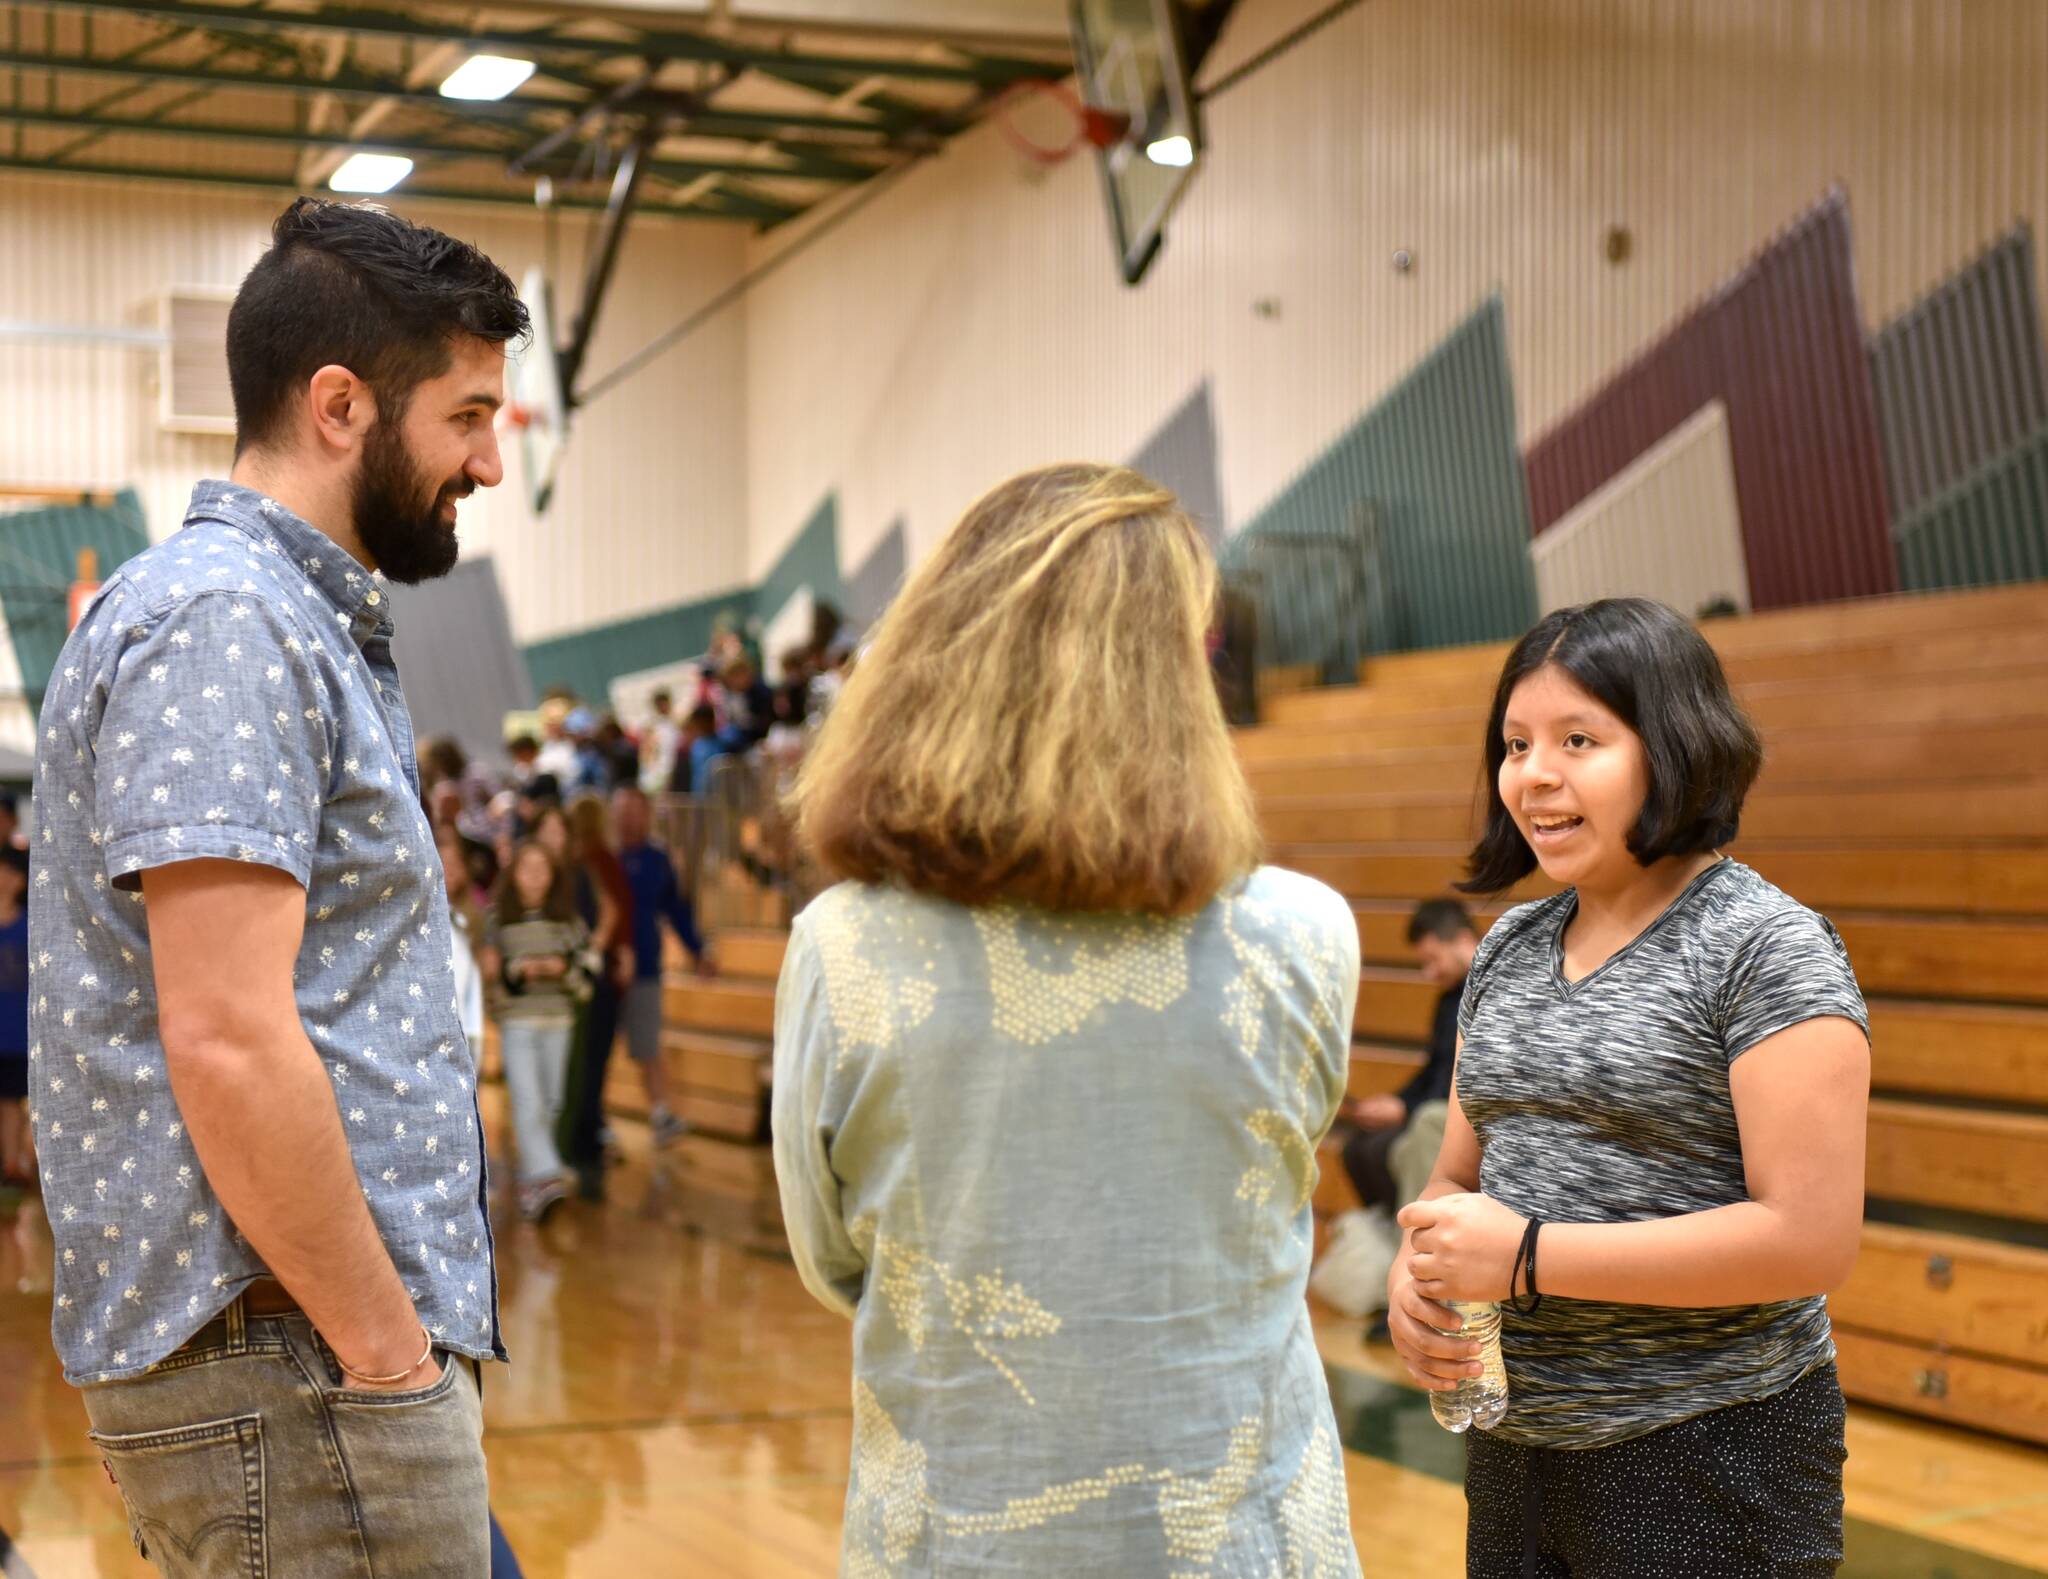 Woodward Middle School student Antonia Paxtor Vicente speaks with filmmaker Zach Ingrasci and eighth-grade school counselor Patricia Beers about Guatemala. Nancy Treder/Kitsap News Group Photos